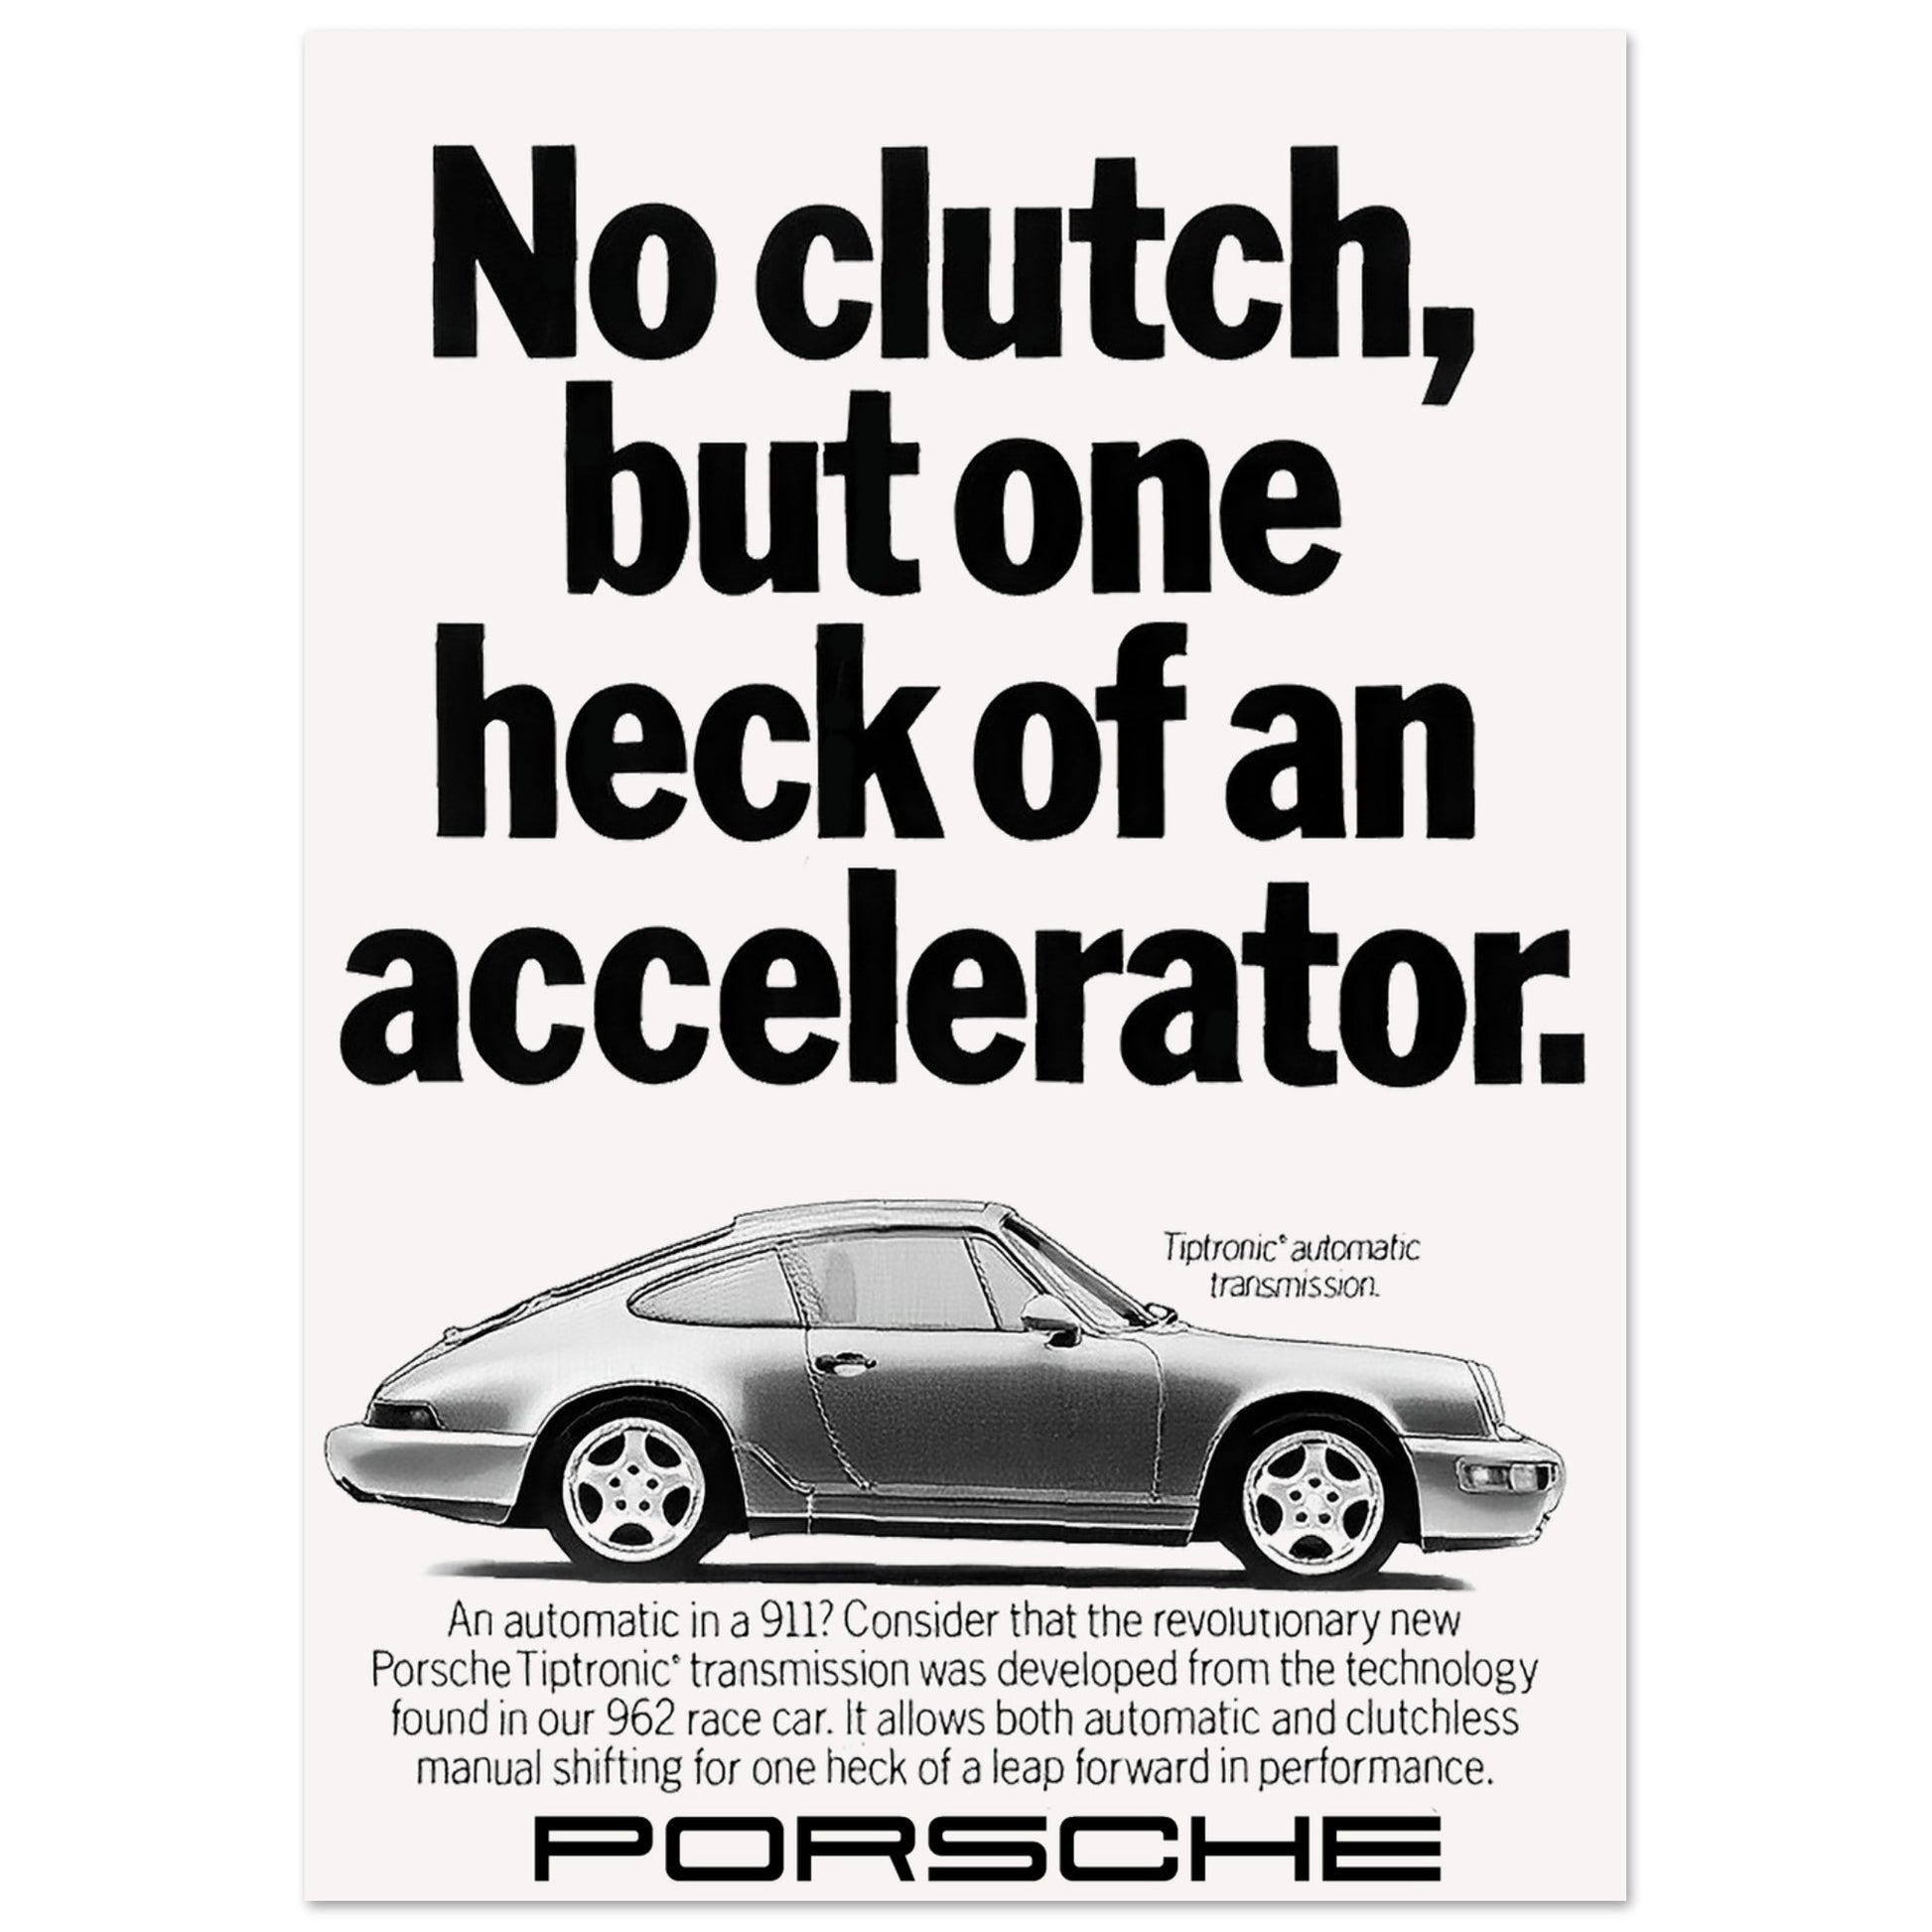 Porsche 911 Vintage Ad Poster "No clutch, but one heck of an accelerator."